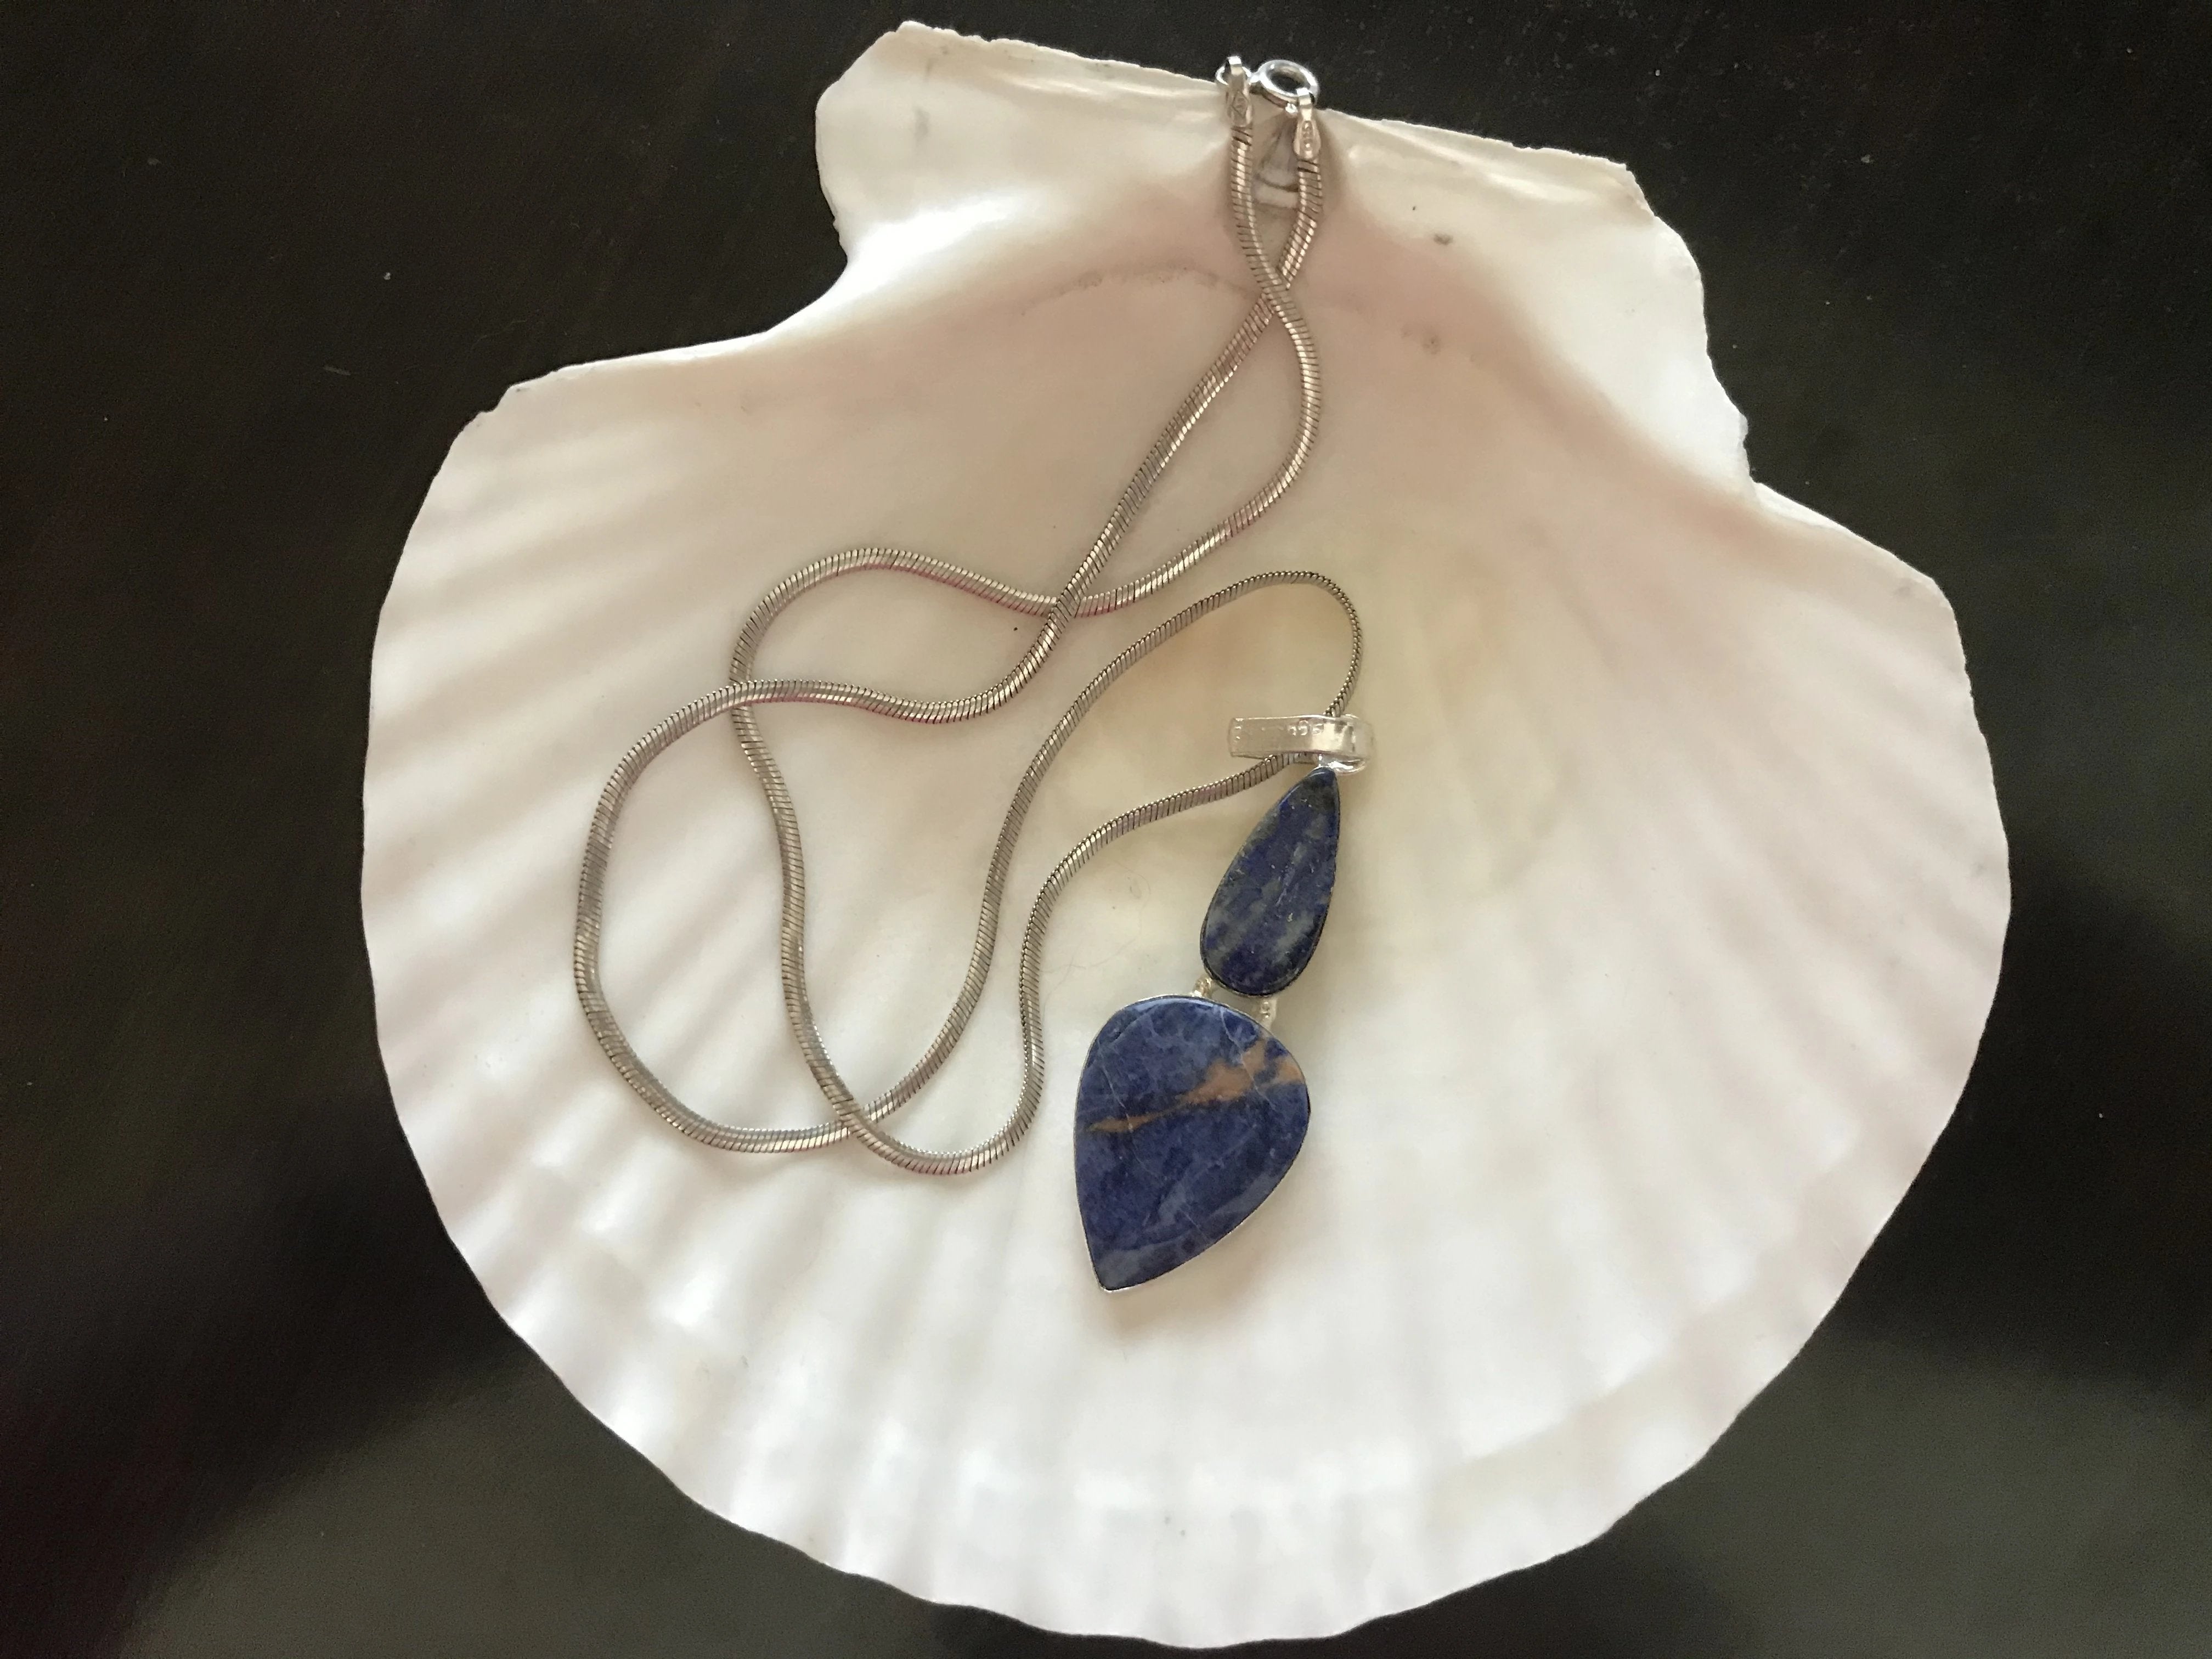 Royal Blue Sodalite Large Silver Pendant on Sterling Snake Chain - Shop Thrifty Treasures